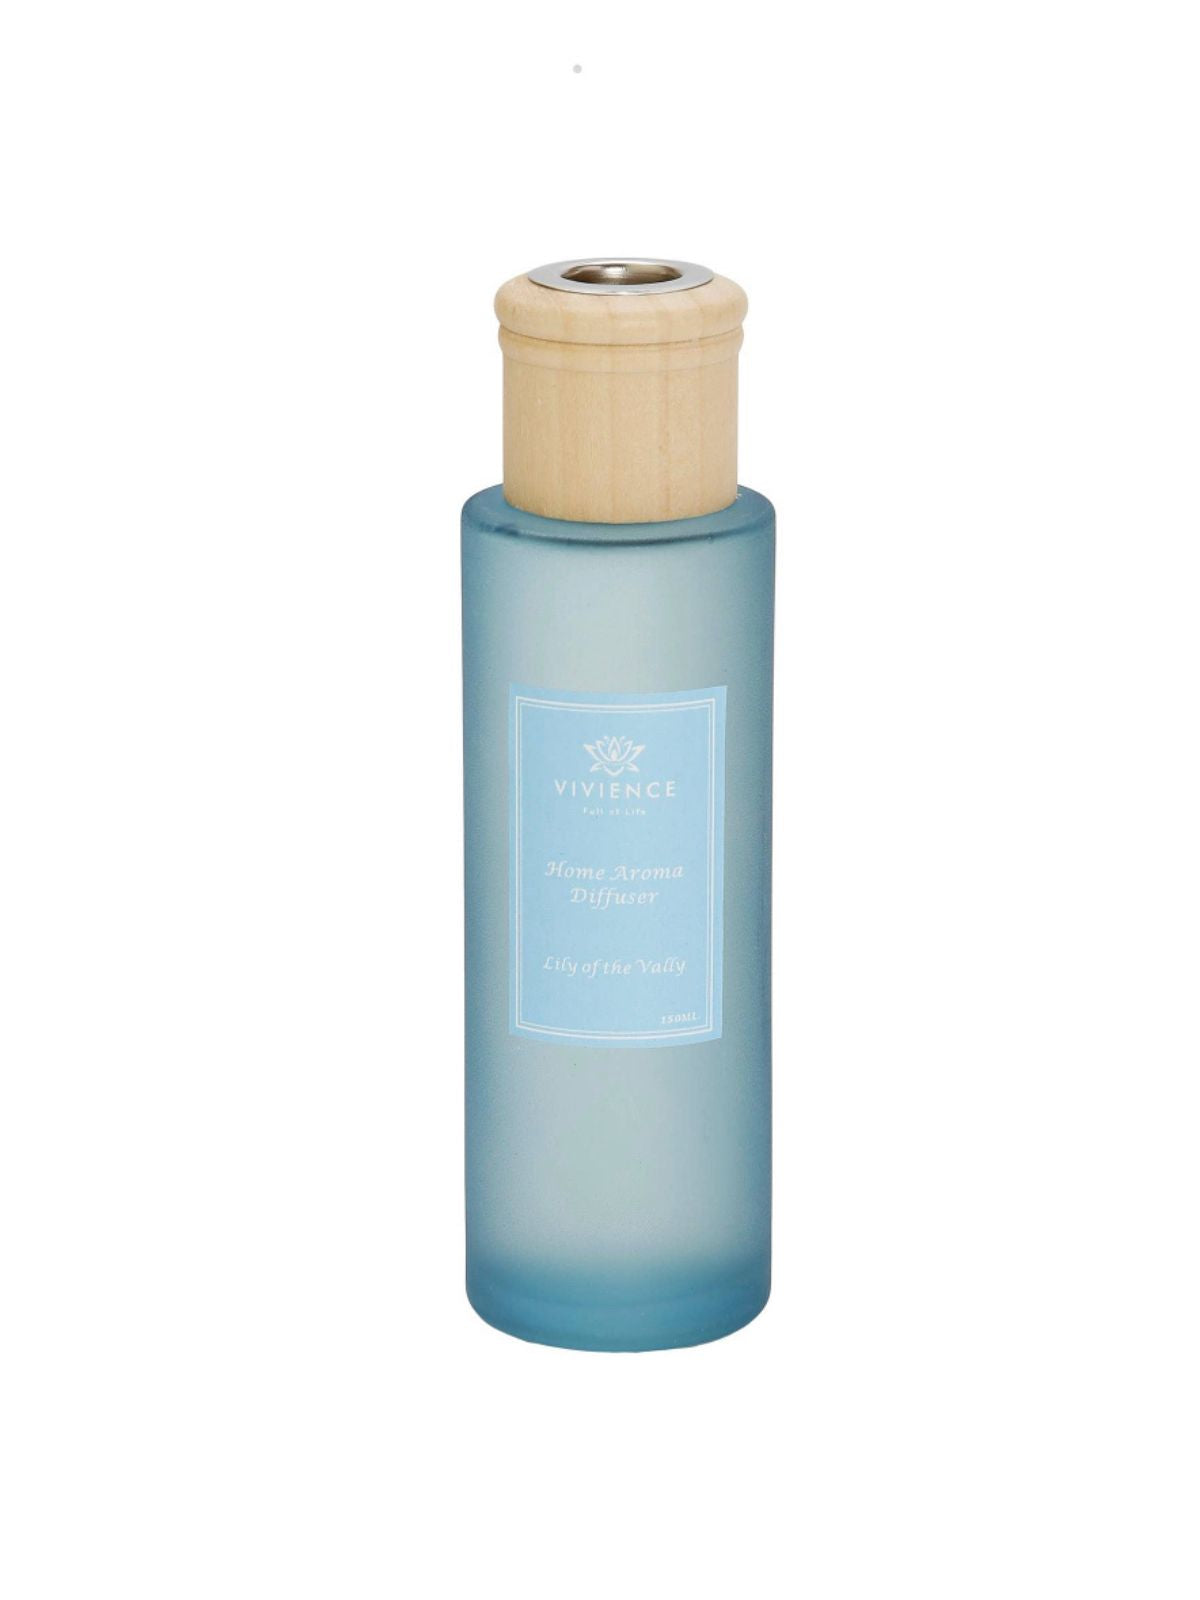 Iris and Rose Scent Reed Diffuser in Blue Bottle.